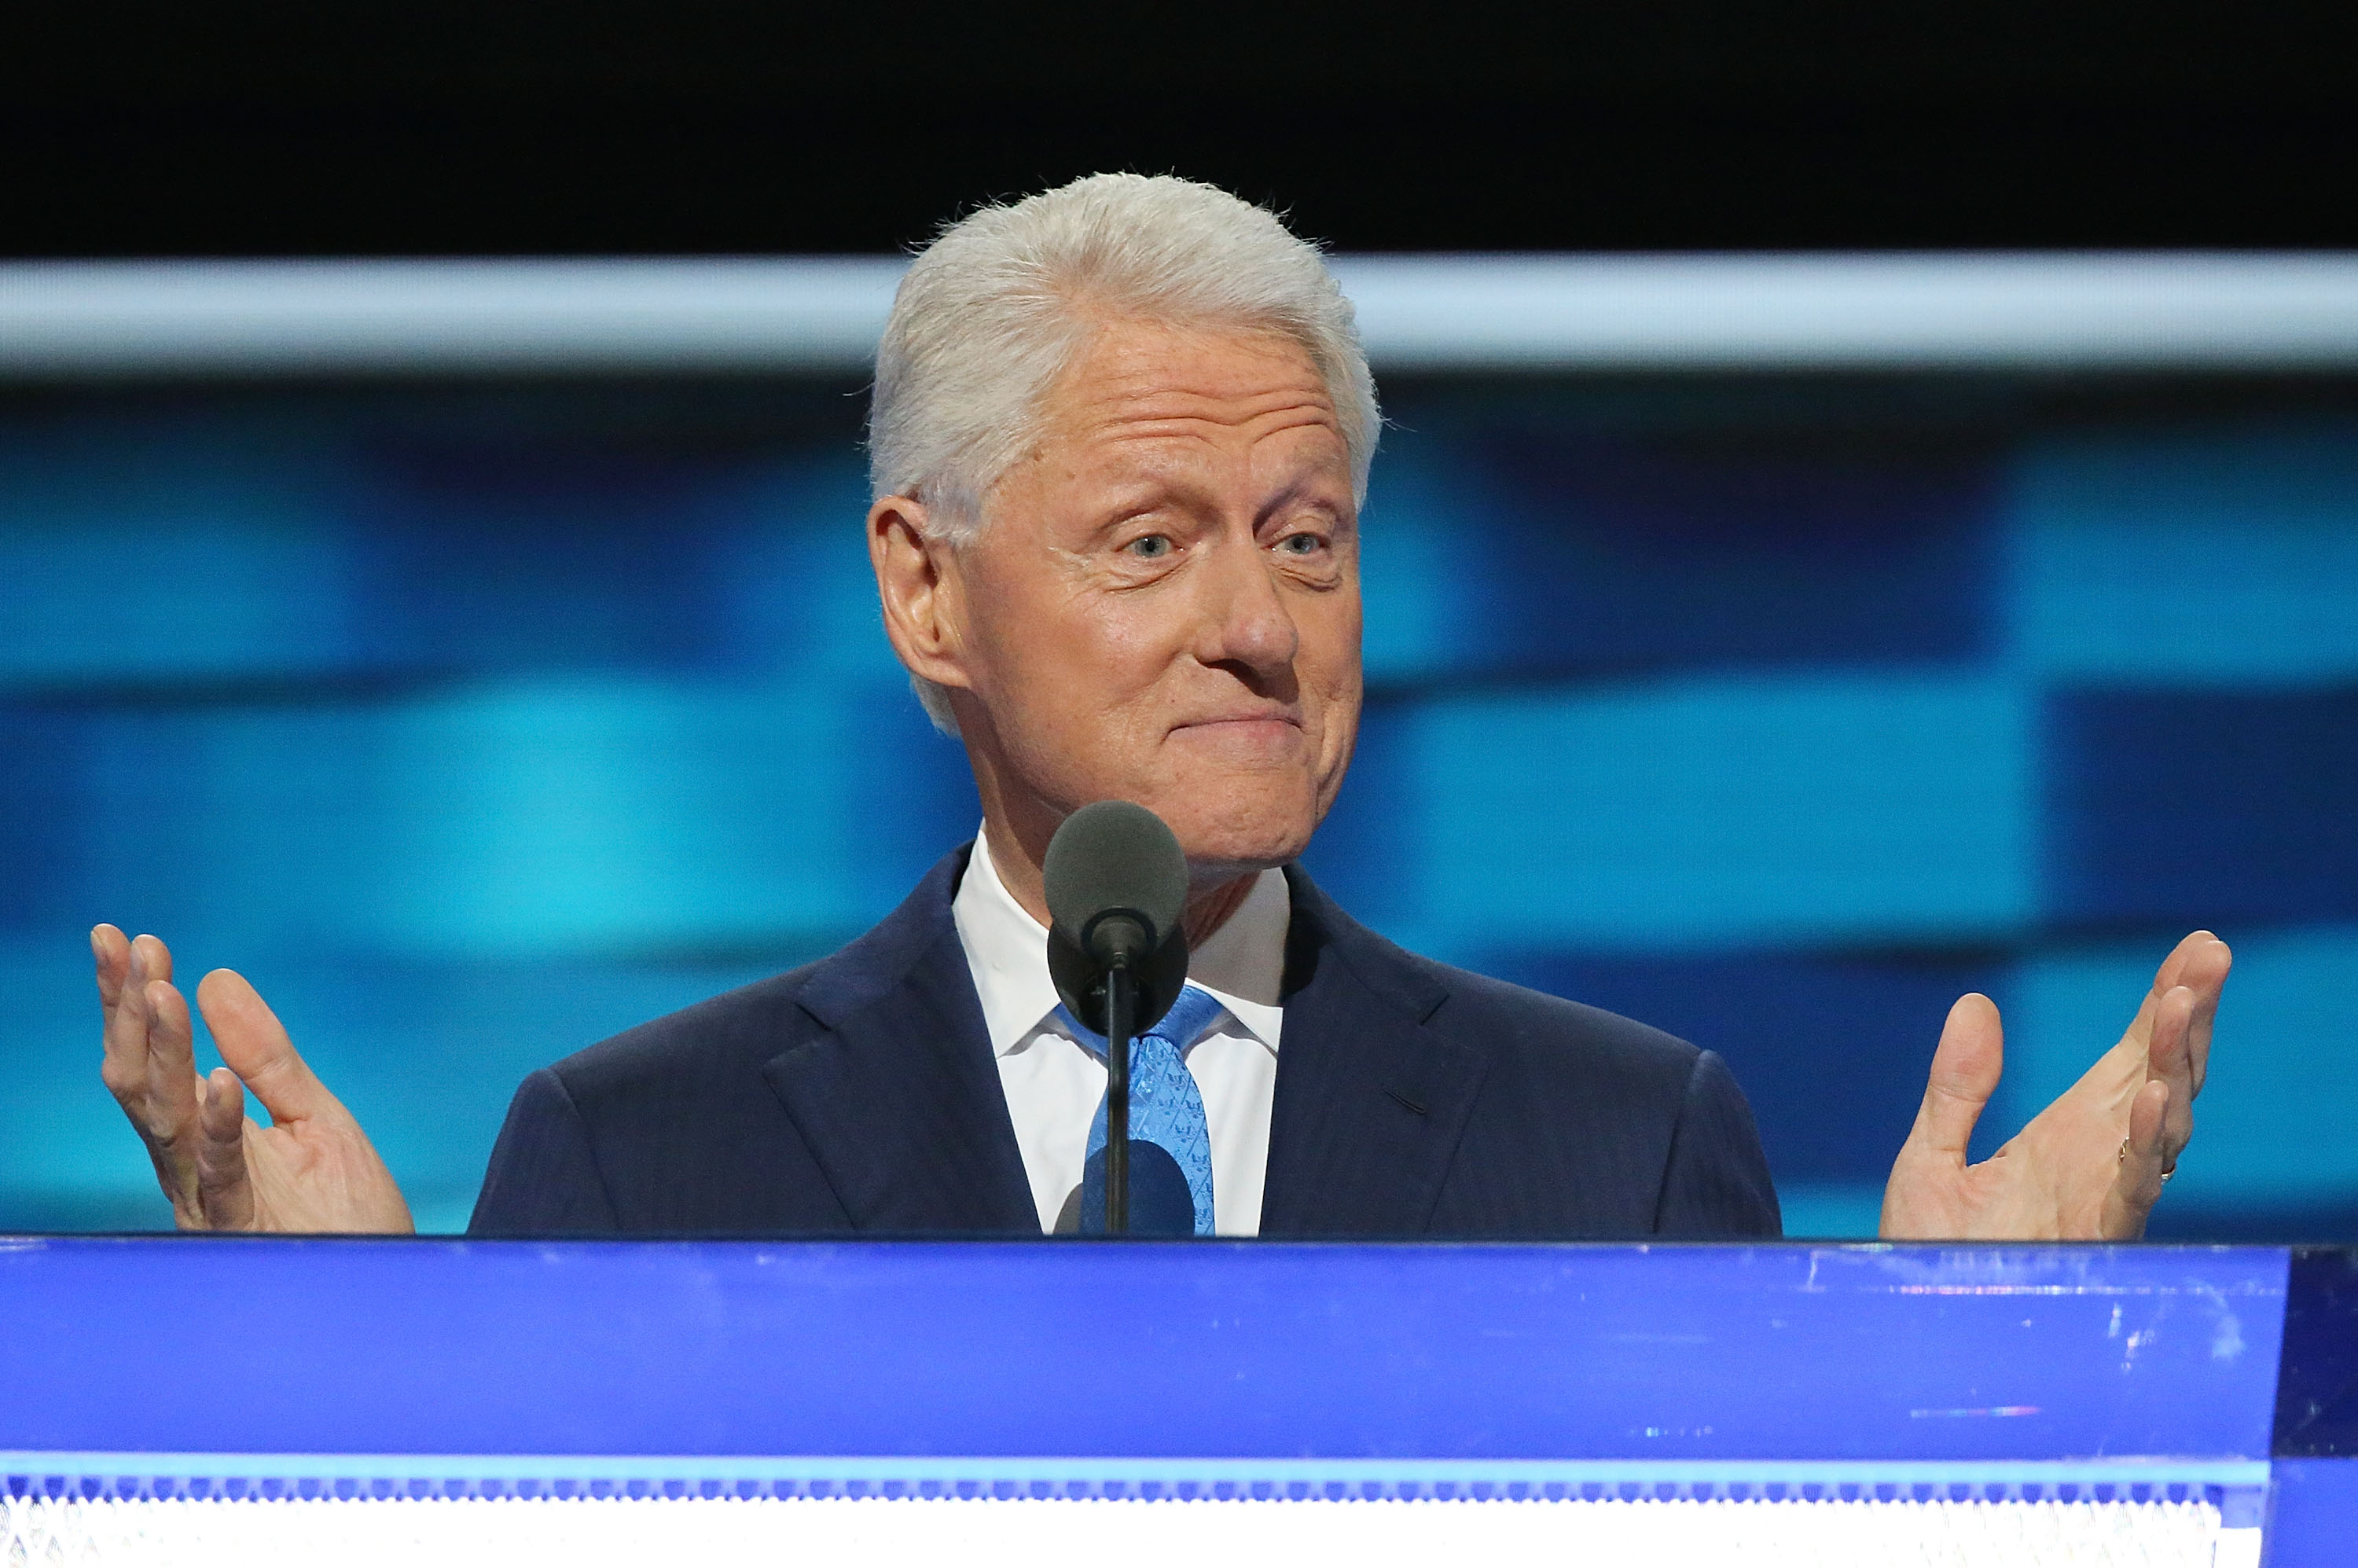 Former U.S. President Bill Clinton delivers remarks on the second day of the 2016 Democratic National Convention at Wells Fargo Center in Philadelphia on July 26, 2016.